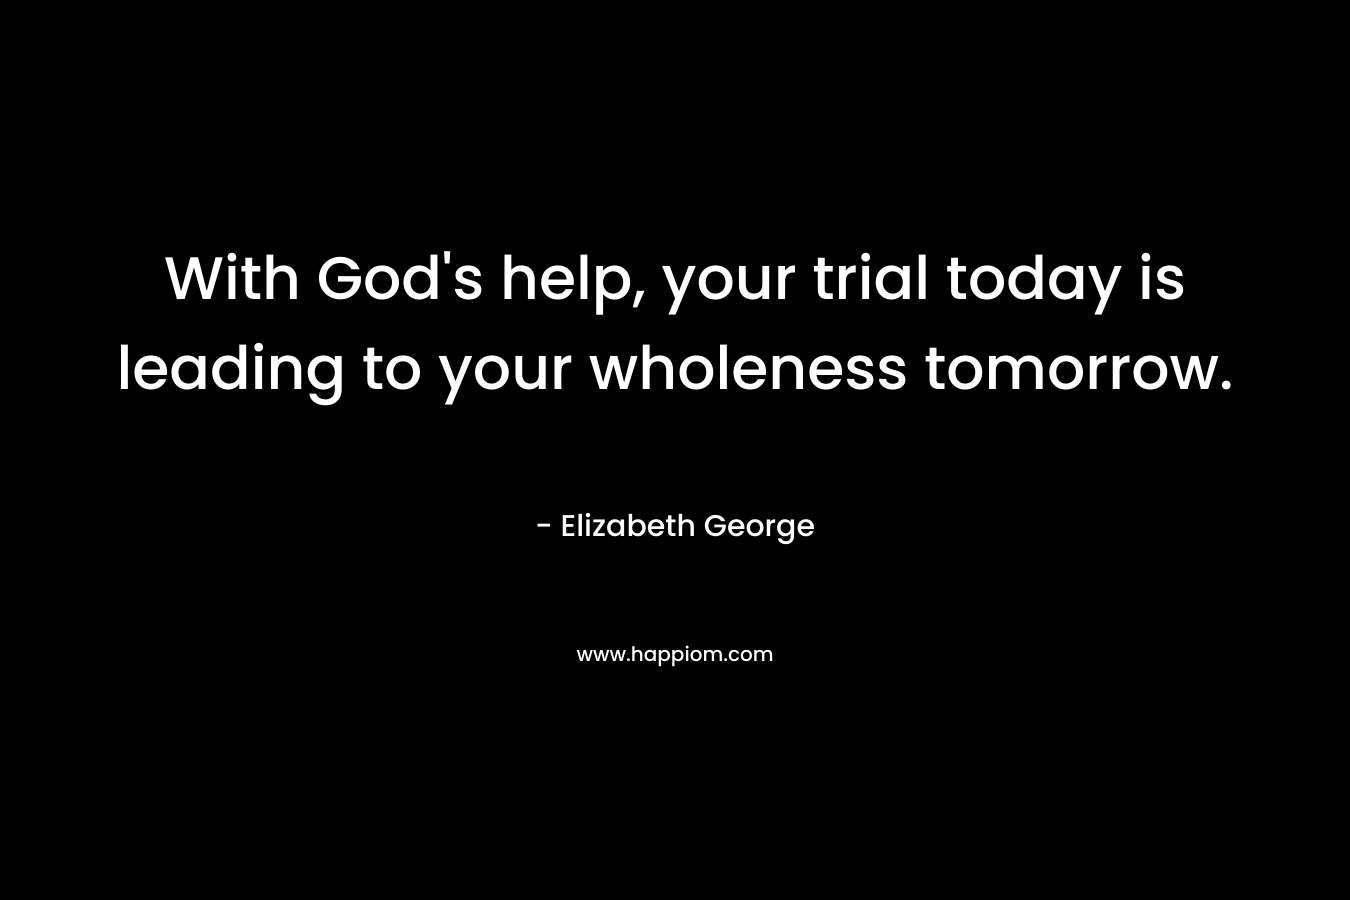 With God's help, your trial today is leading to your wholeness tomorrow.